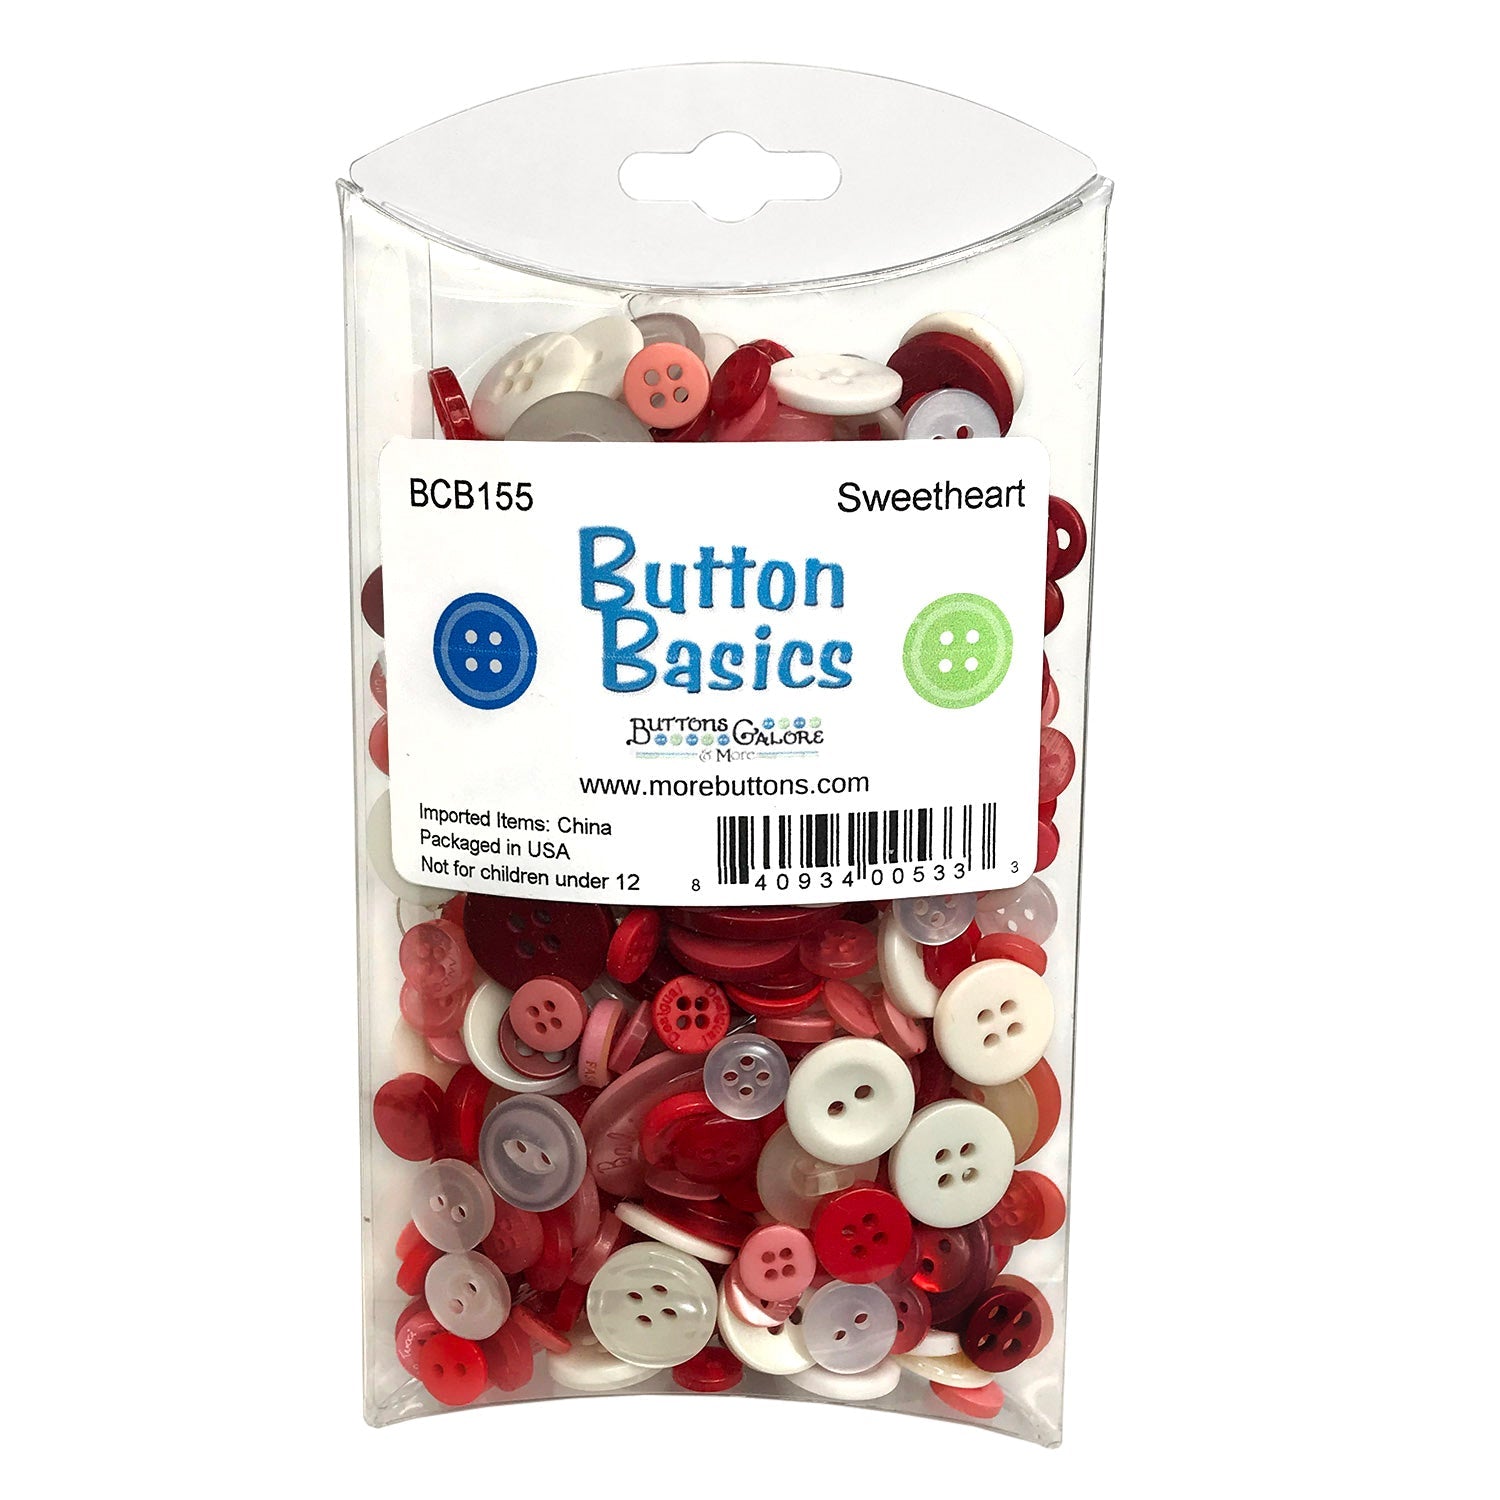 Sweetheart - Buttons Galore and More